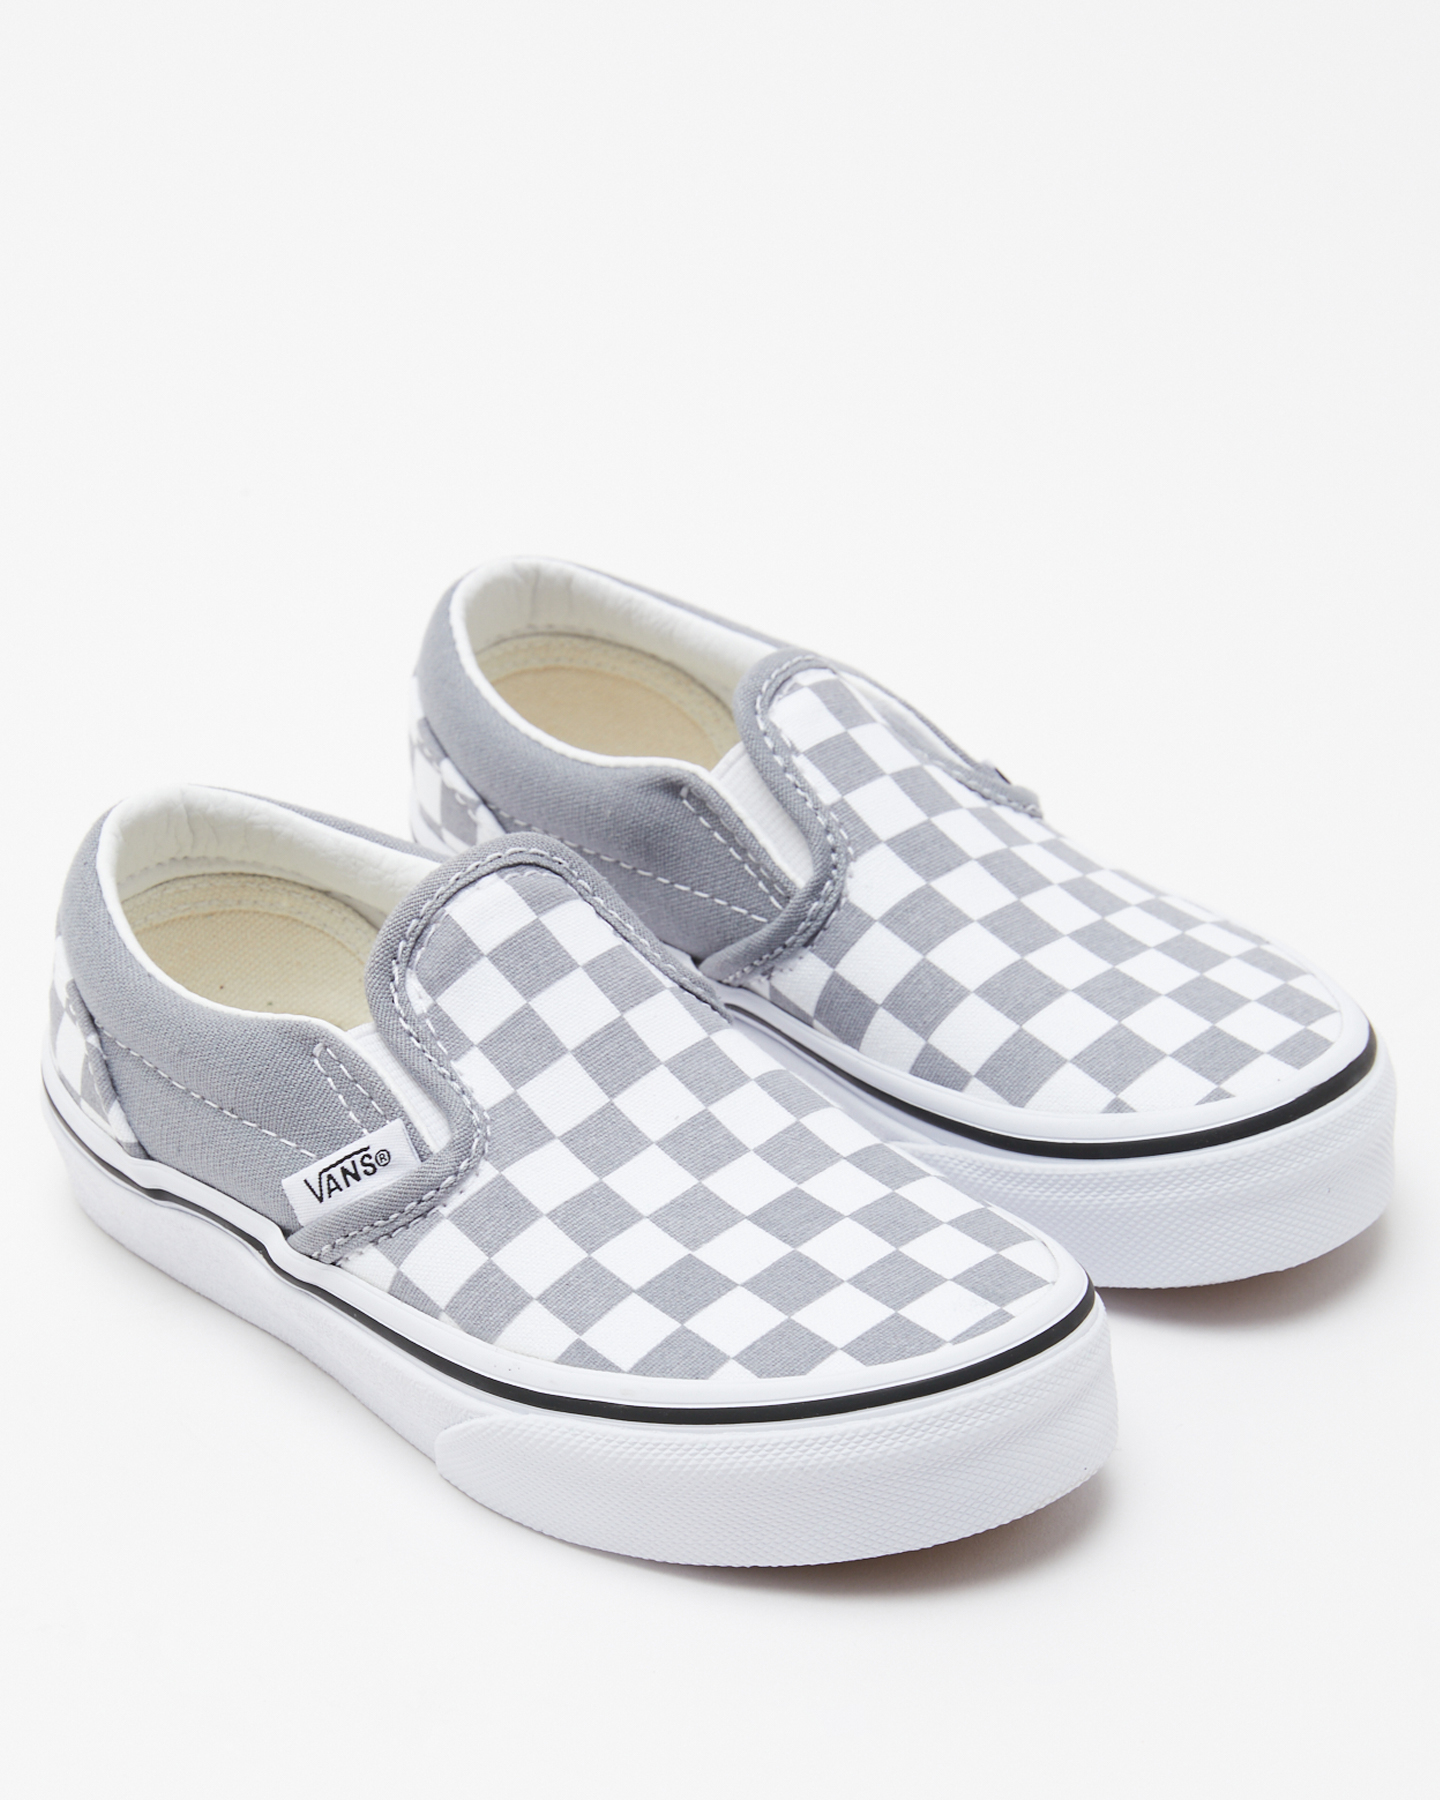 Vans Classic Slip-On Color Theory Checkerboard Shoe - Tradewinds ...